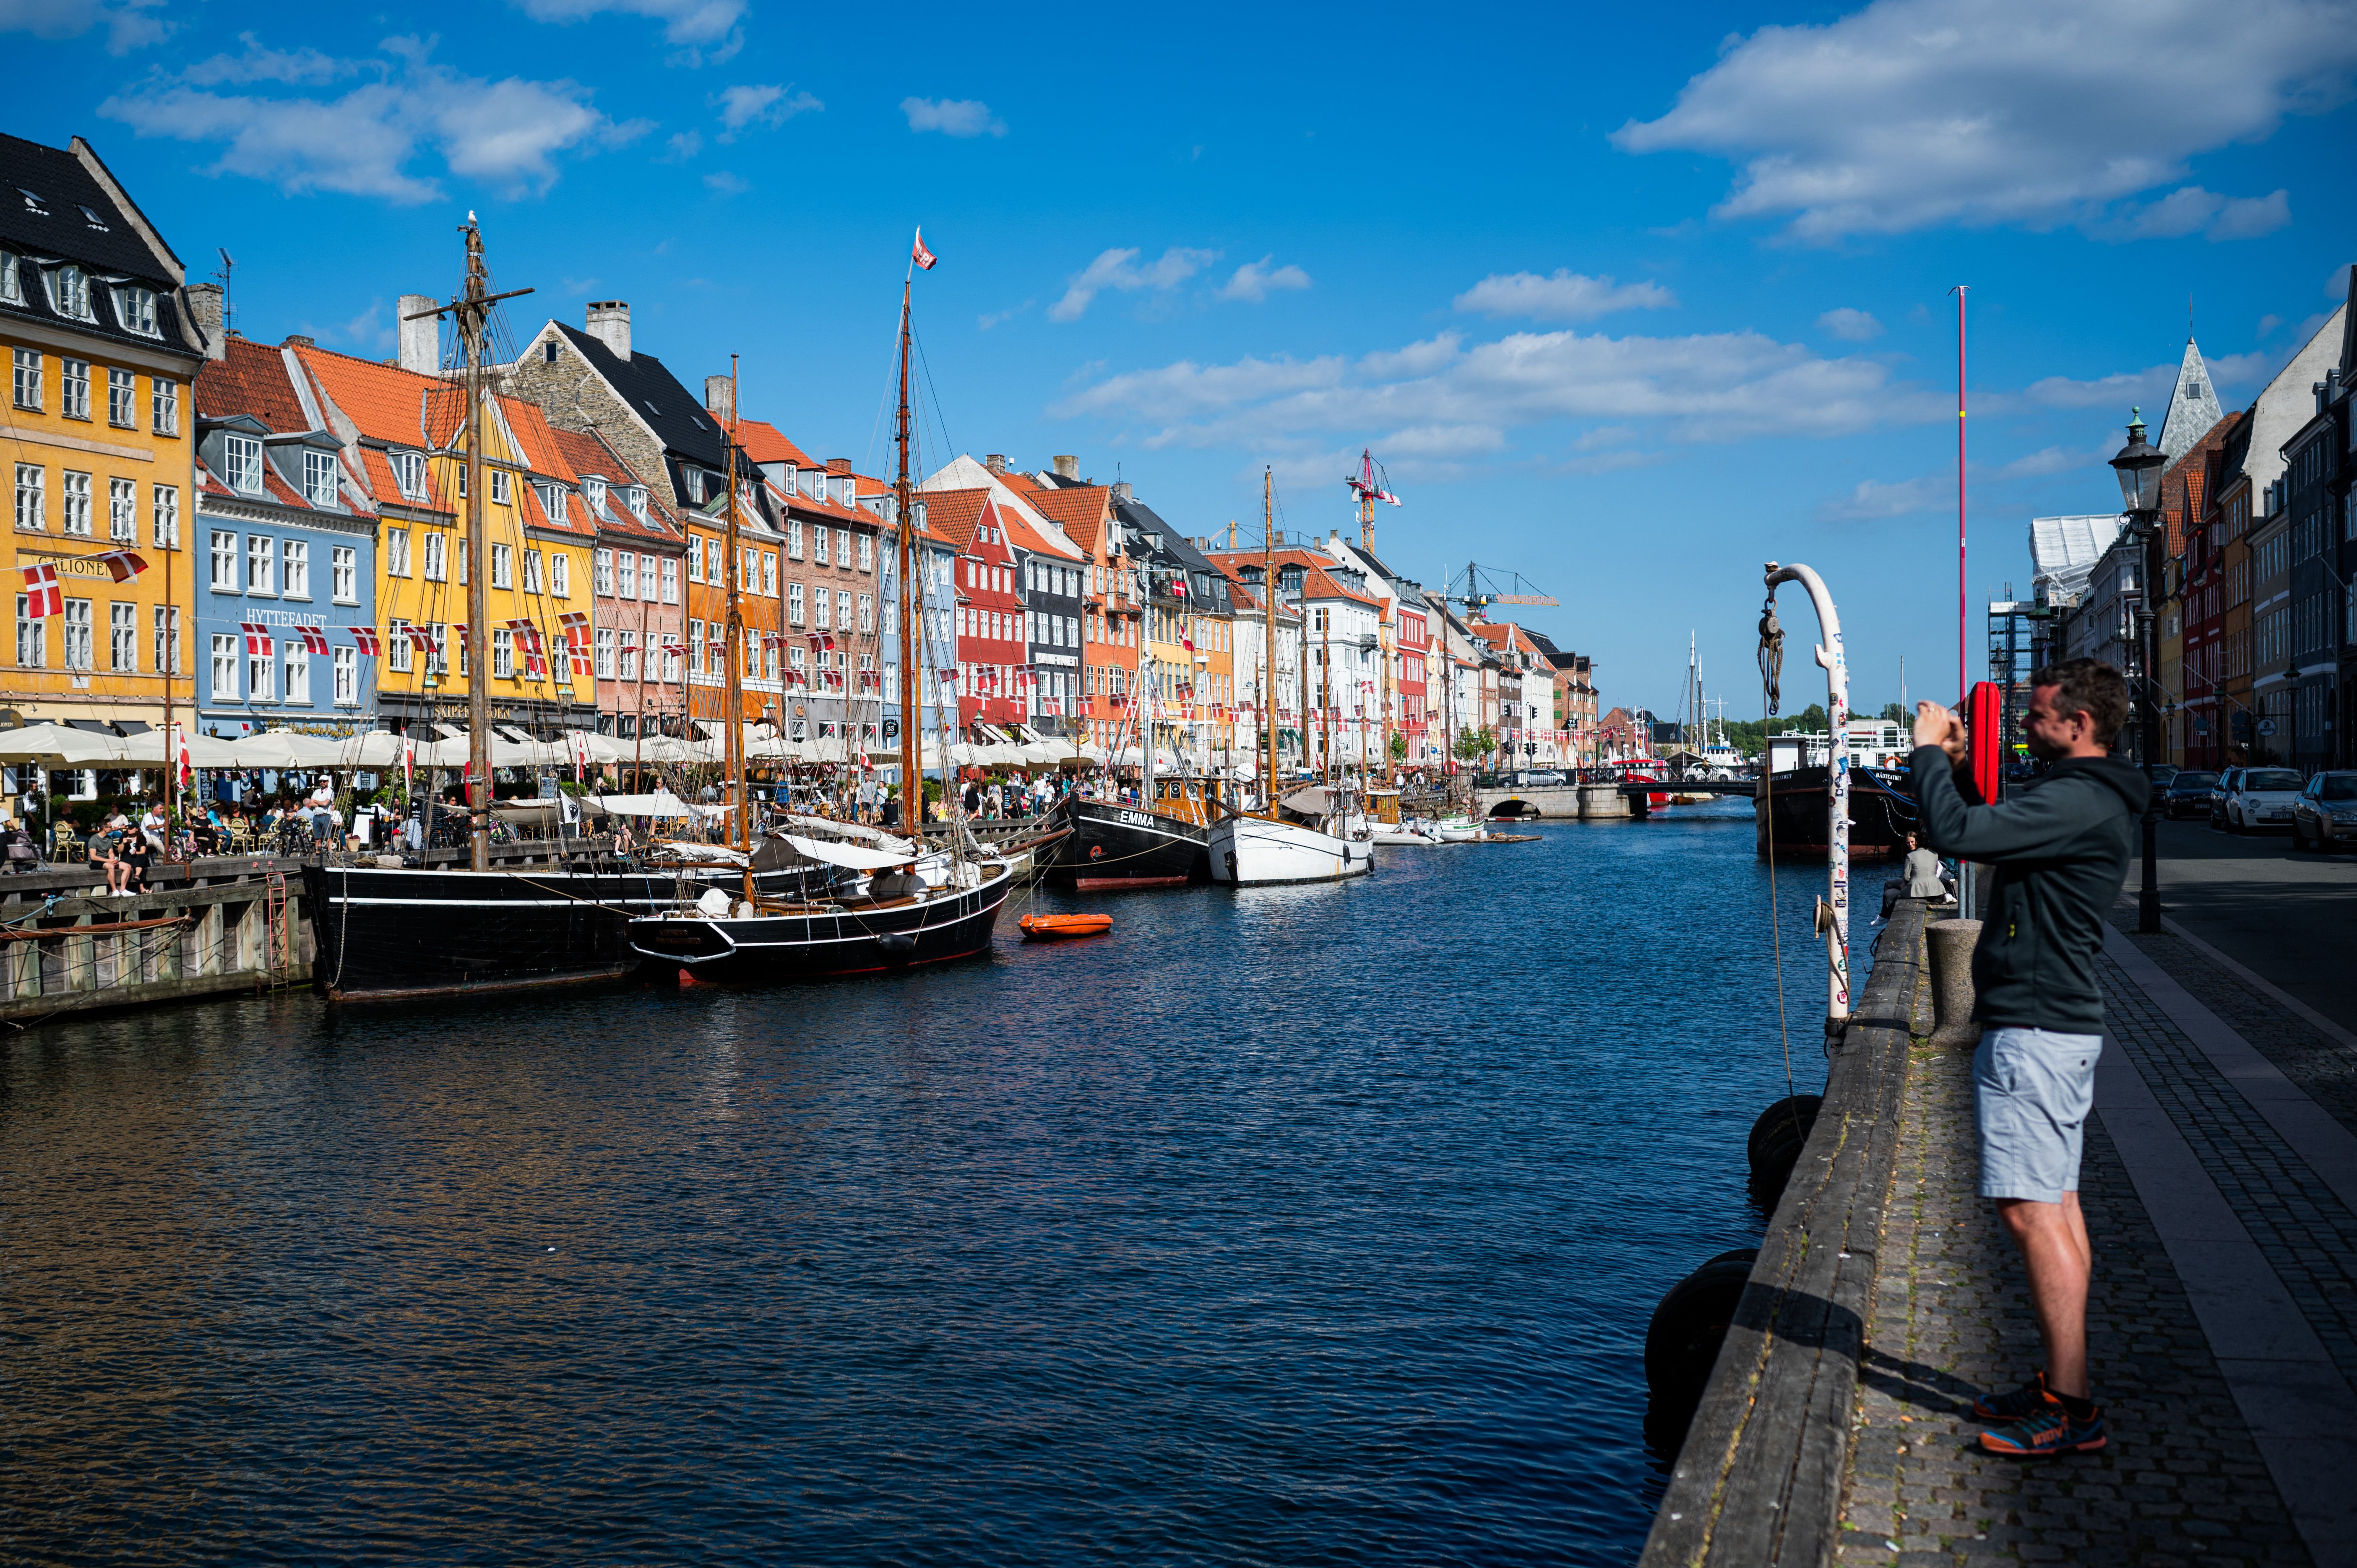 Tourists visit Nyhavn, the 17th-century waterfront, in Copenhagen, Denmark, in this 2021 file photo.